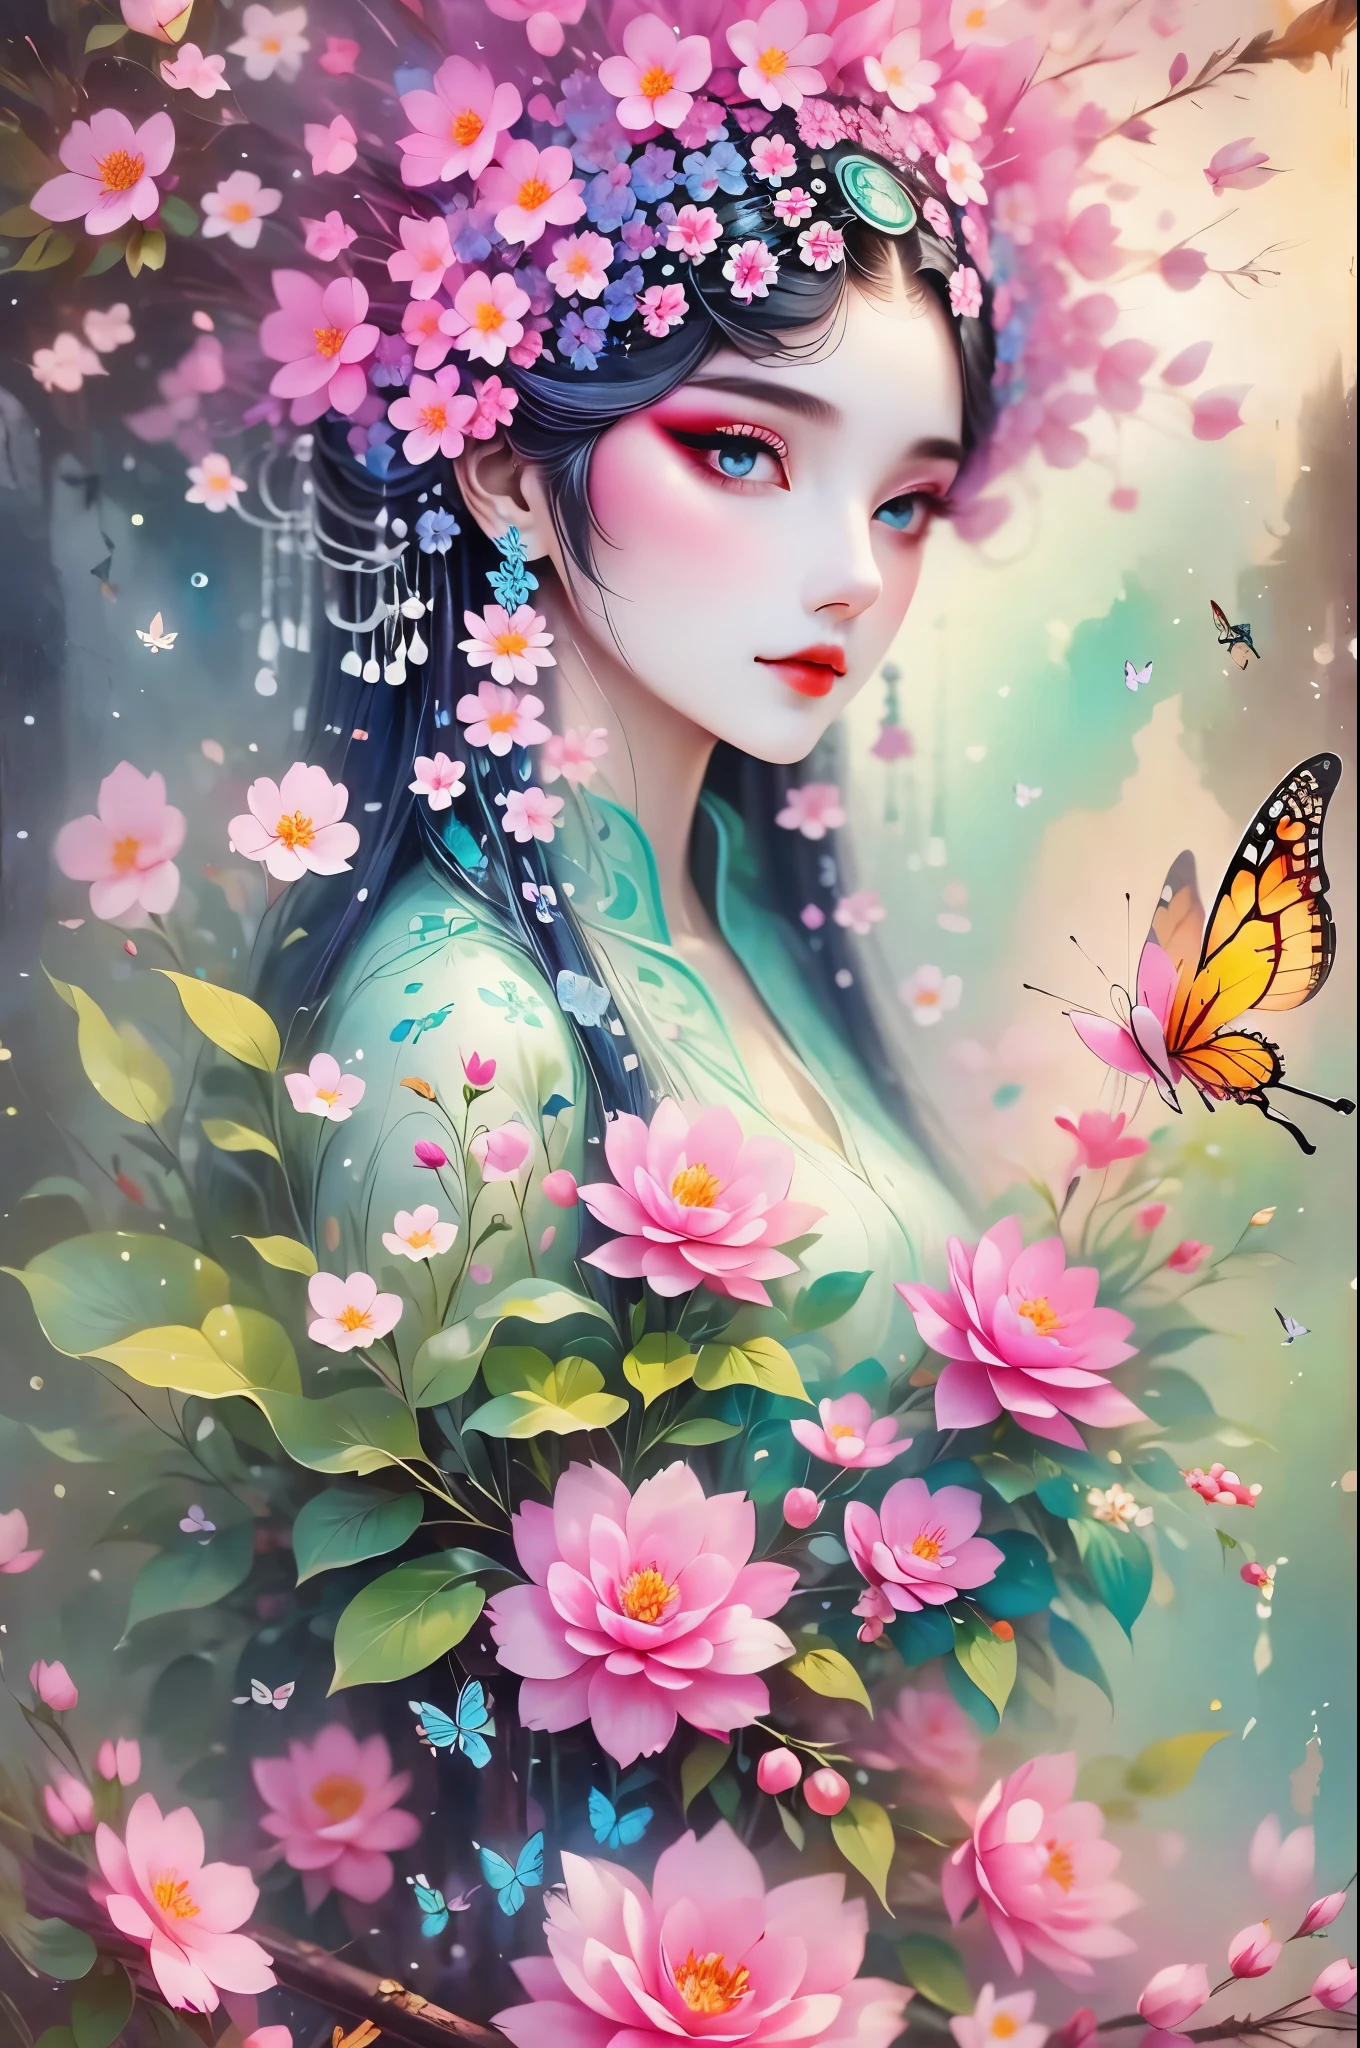 group photo，portrait，The landscape is filled with paths made of various flowers that represent your journey. This is a quiet grove, Magical beautiful delicate butterfly, Things of all sizes fly around it . The colors chosen for the cover exude an air of sobriety, brightness, Connection with nature，Dusk begins in the background, There is a mysterious and charming atmosphere. There is a beautiful woman with long hair in the woods, delicate face, And very beautiful. Woman is in the center of the image，Smaller in size than landscape，There are many butterflies representing transformation next to it.
